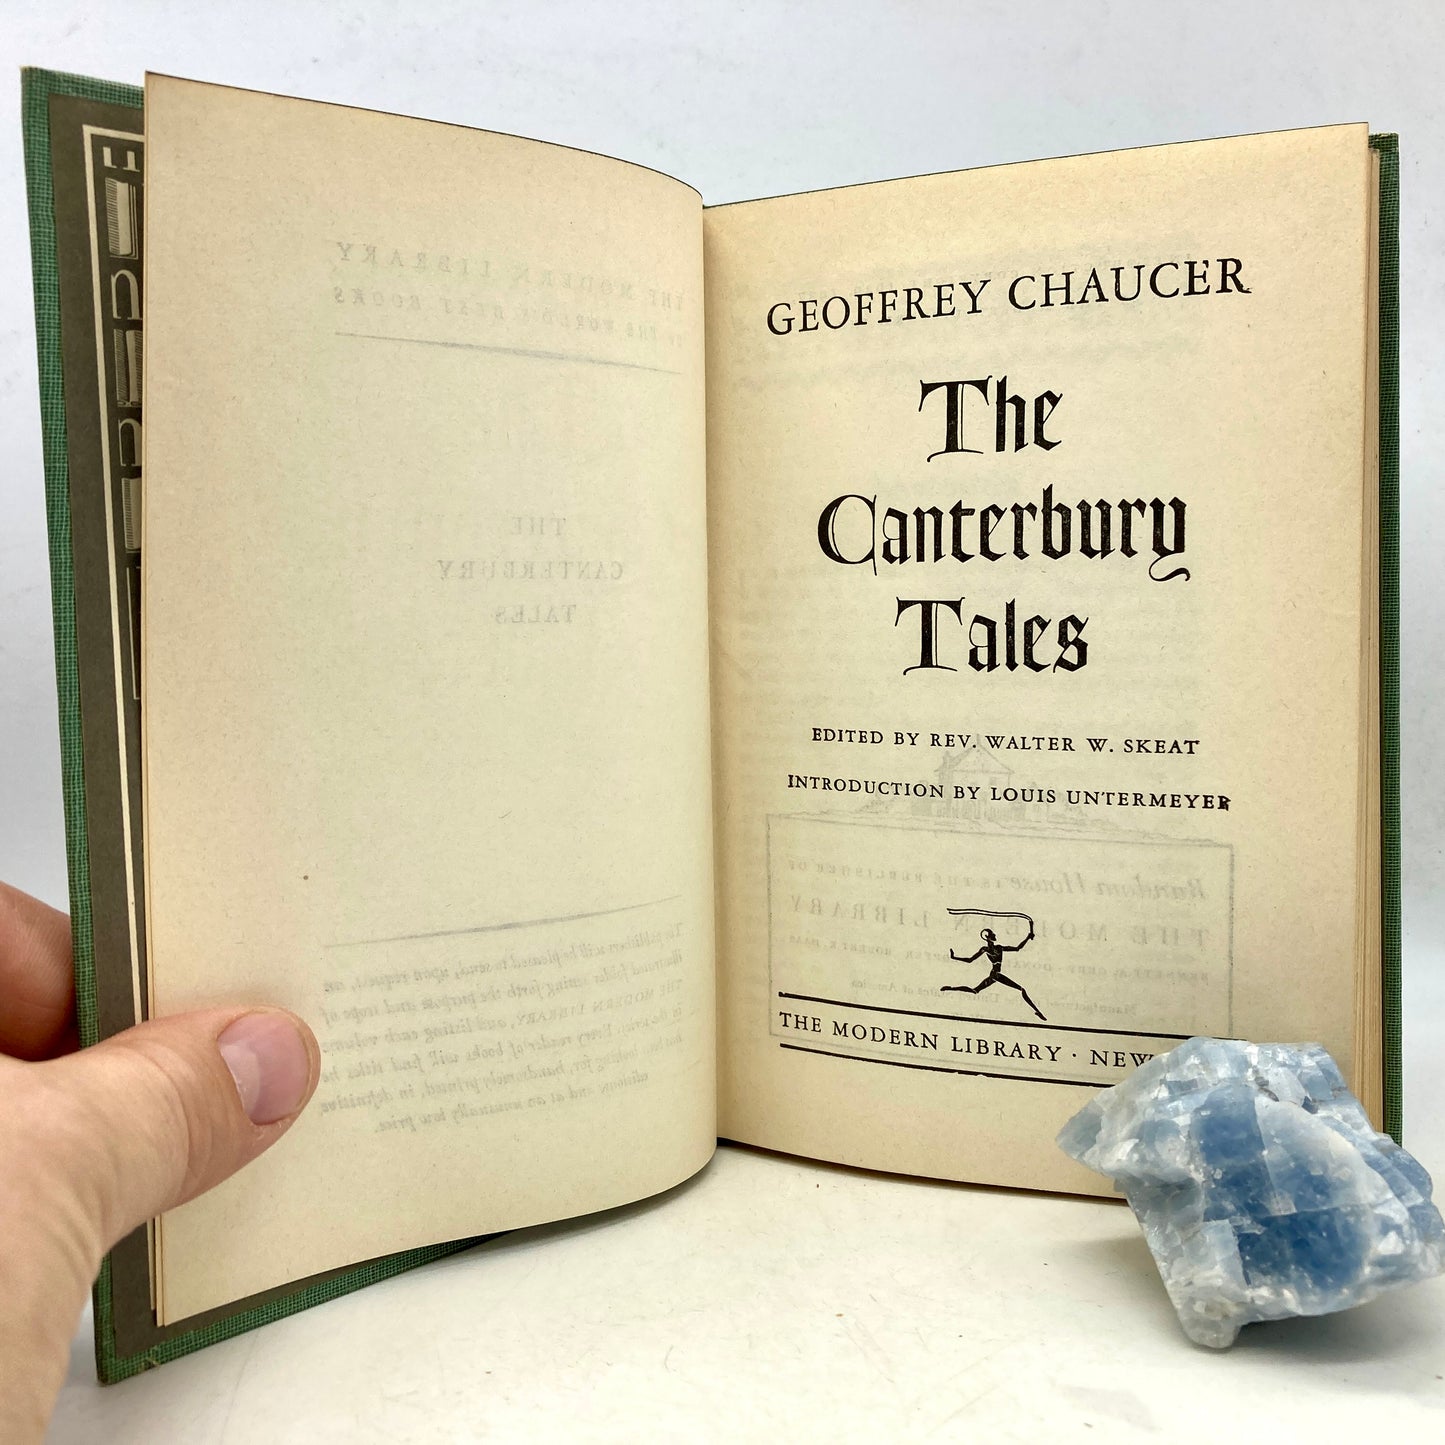 CHAUCER, Geoffrey "The Canterbury Tales" [Modern Library, 1937]